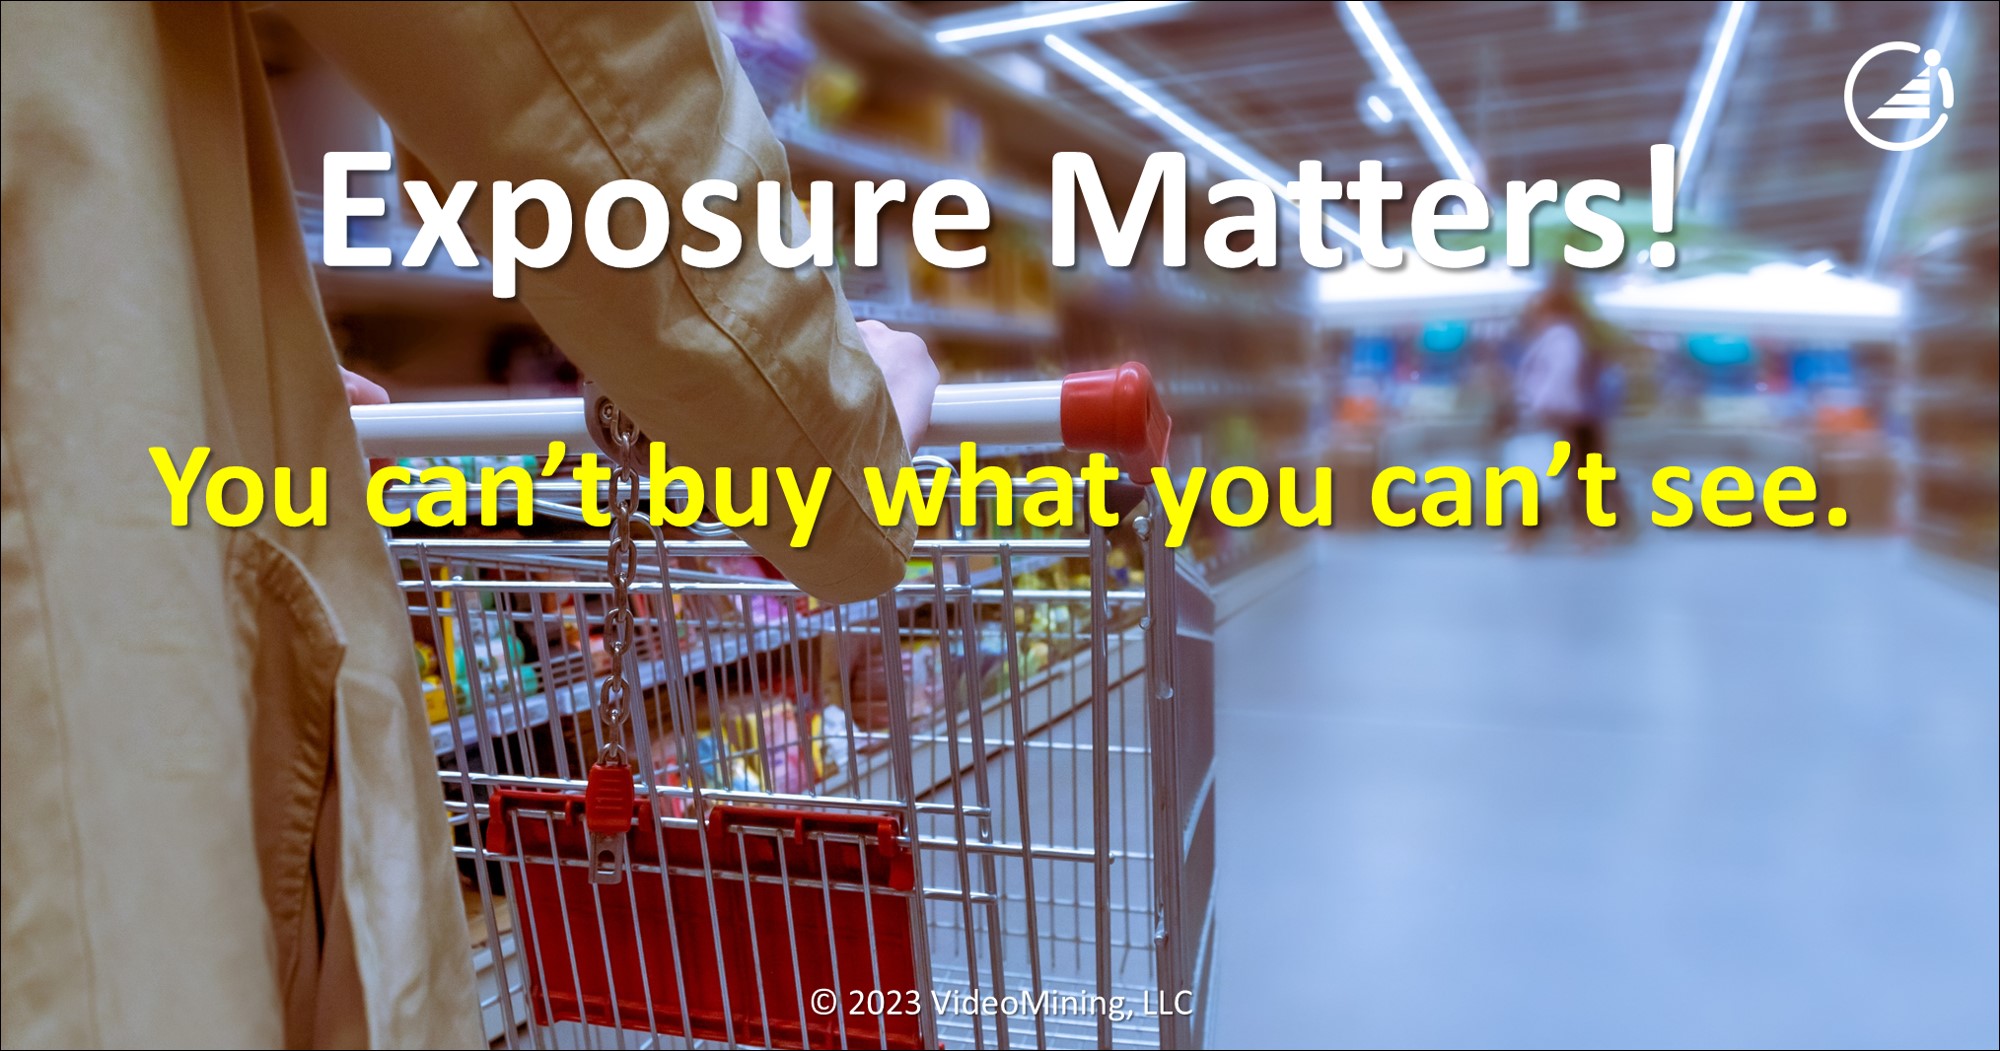 Exposure Matters: You can't buy what you can't see!